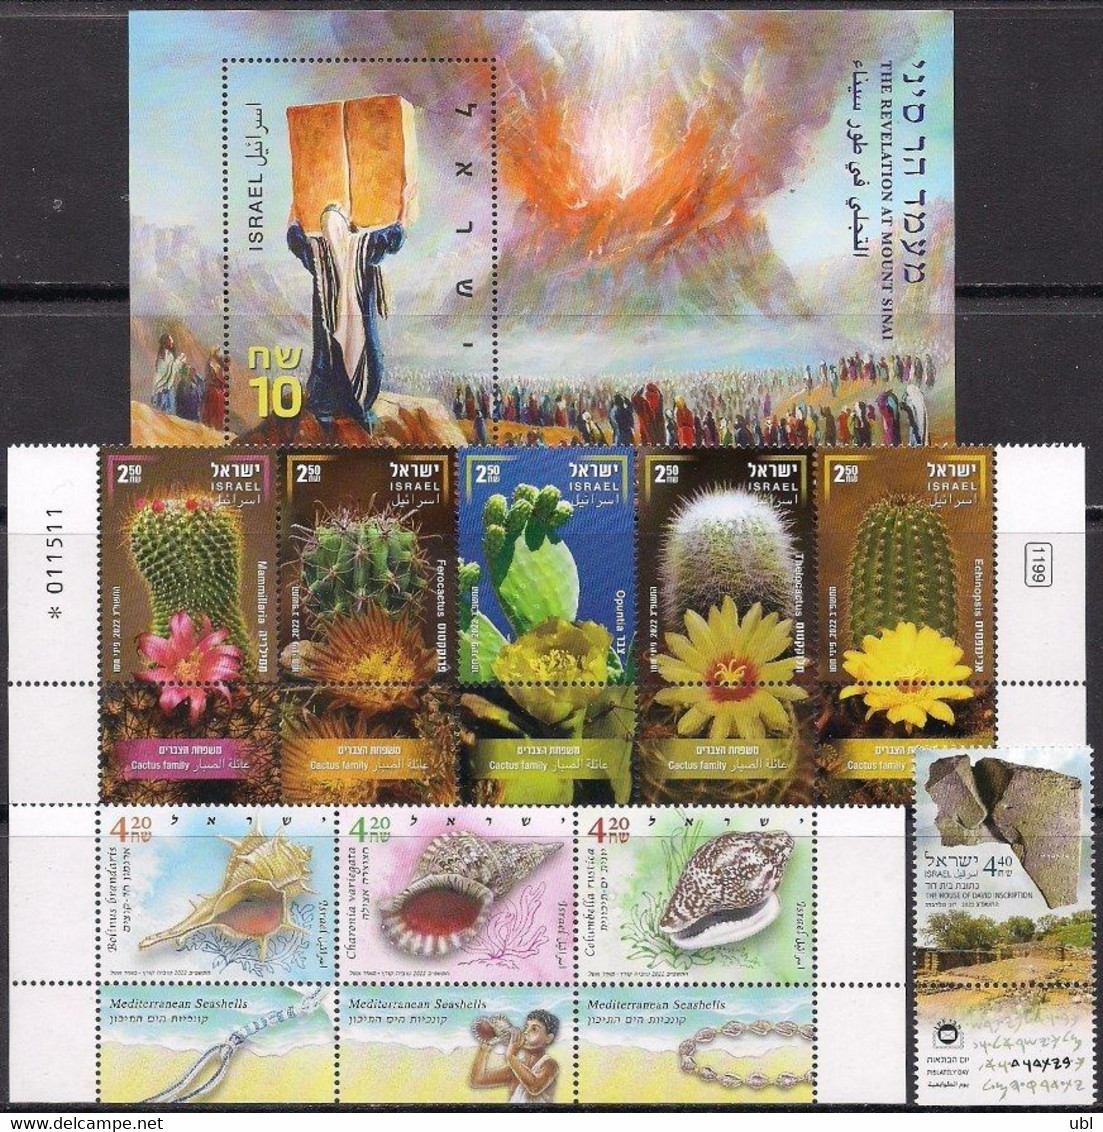 ISRAEL 2022 YEARBOOK - THE COMPLETE ANNUAL STAMPS & SOUVENIR SHEET ISSUE IN A DECORATIVE ALBUM - Collections, Lots & Series